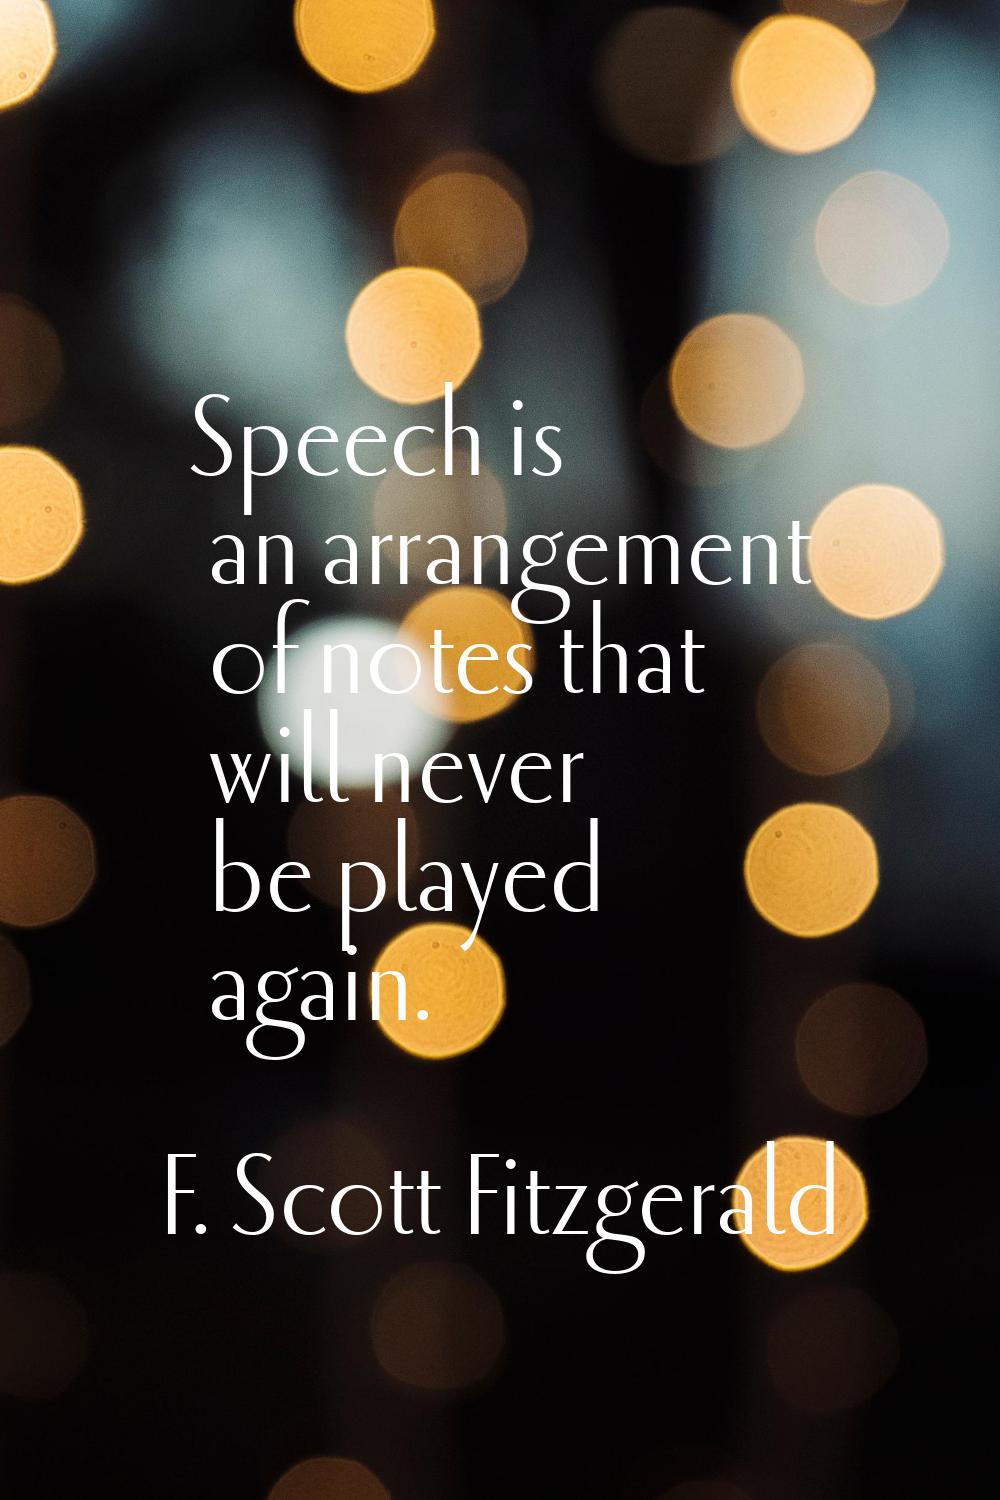 Speech is an arrangement of notes that will never be played again.